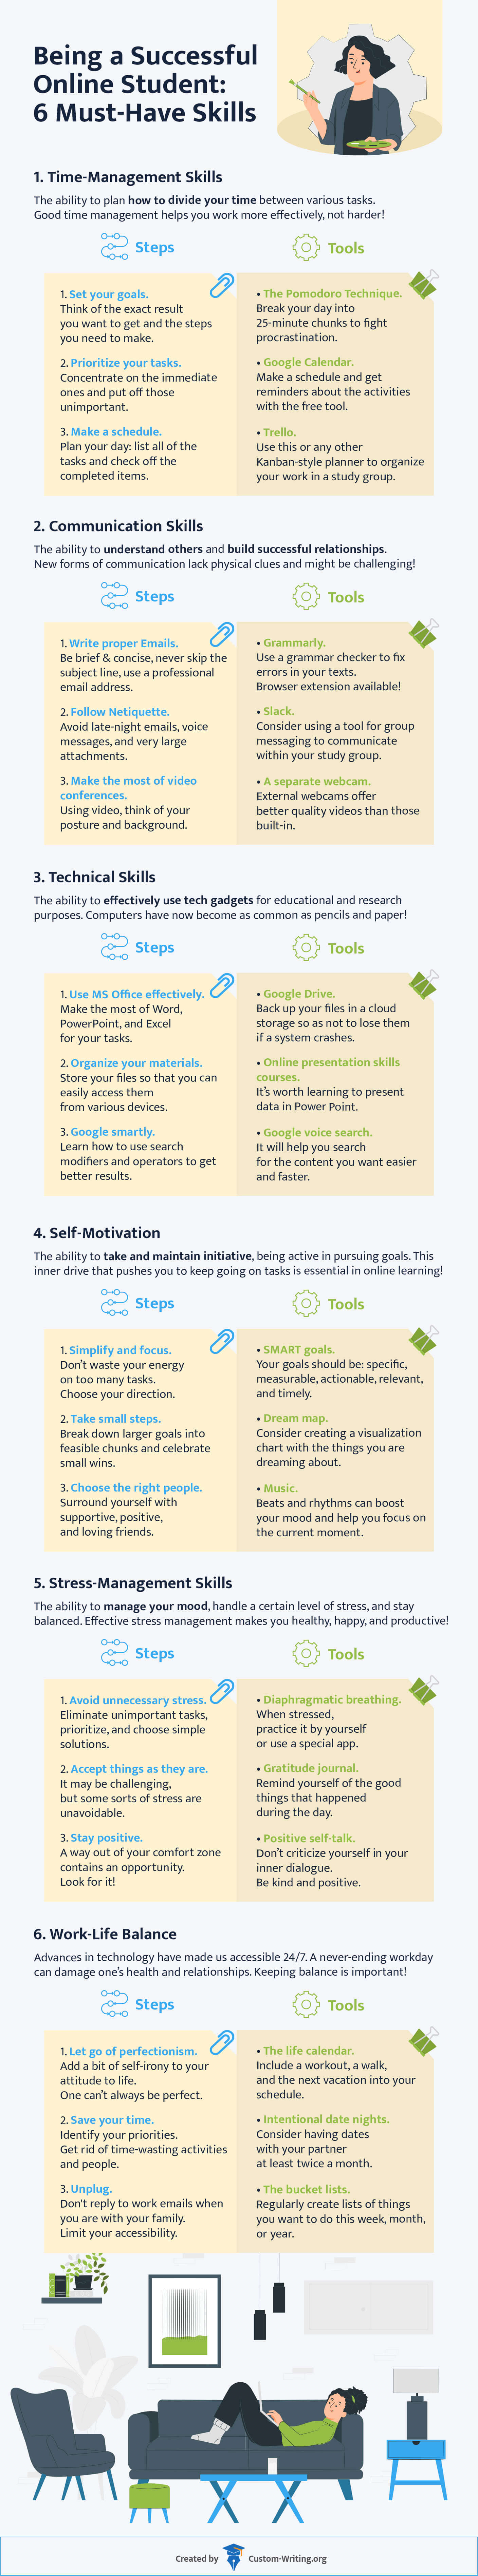 The infographic describes 6 must-have skills and characteristics of a successful online student. 